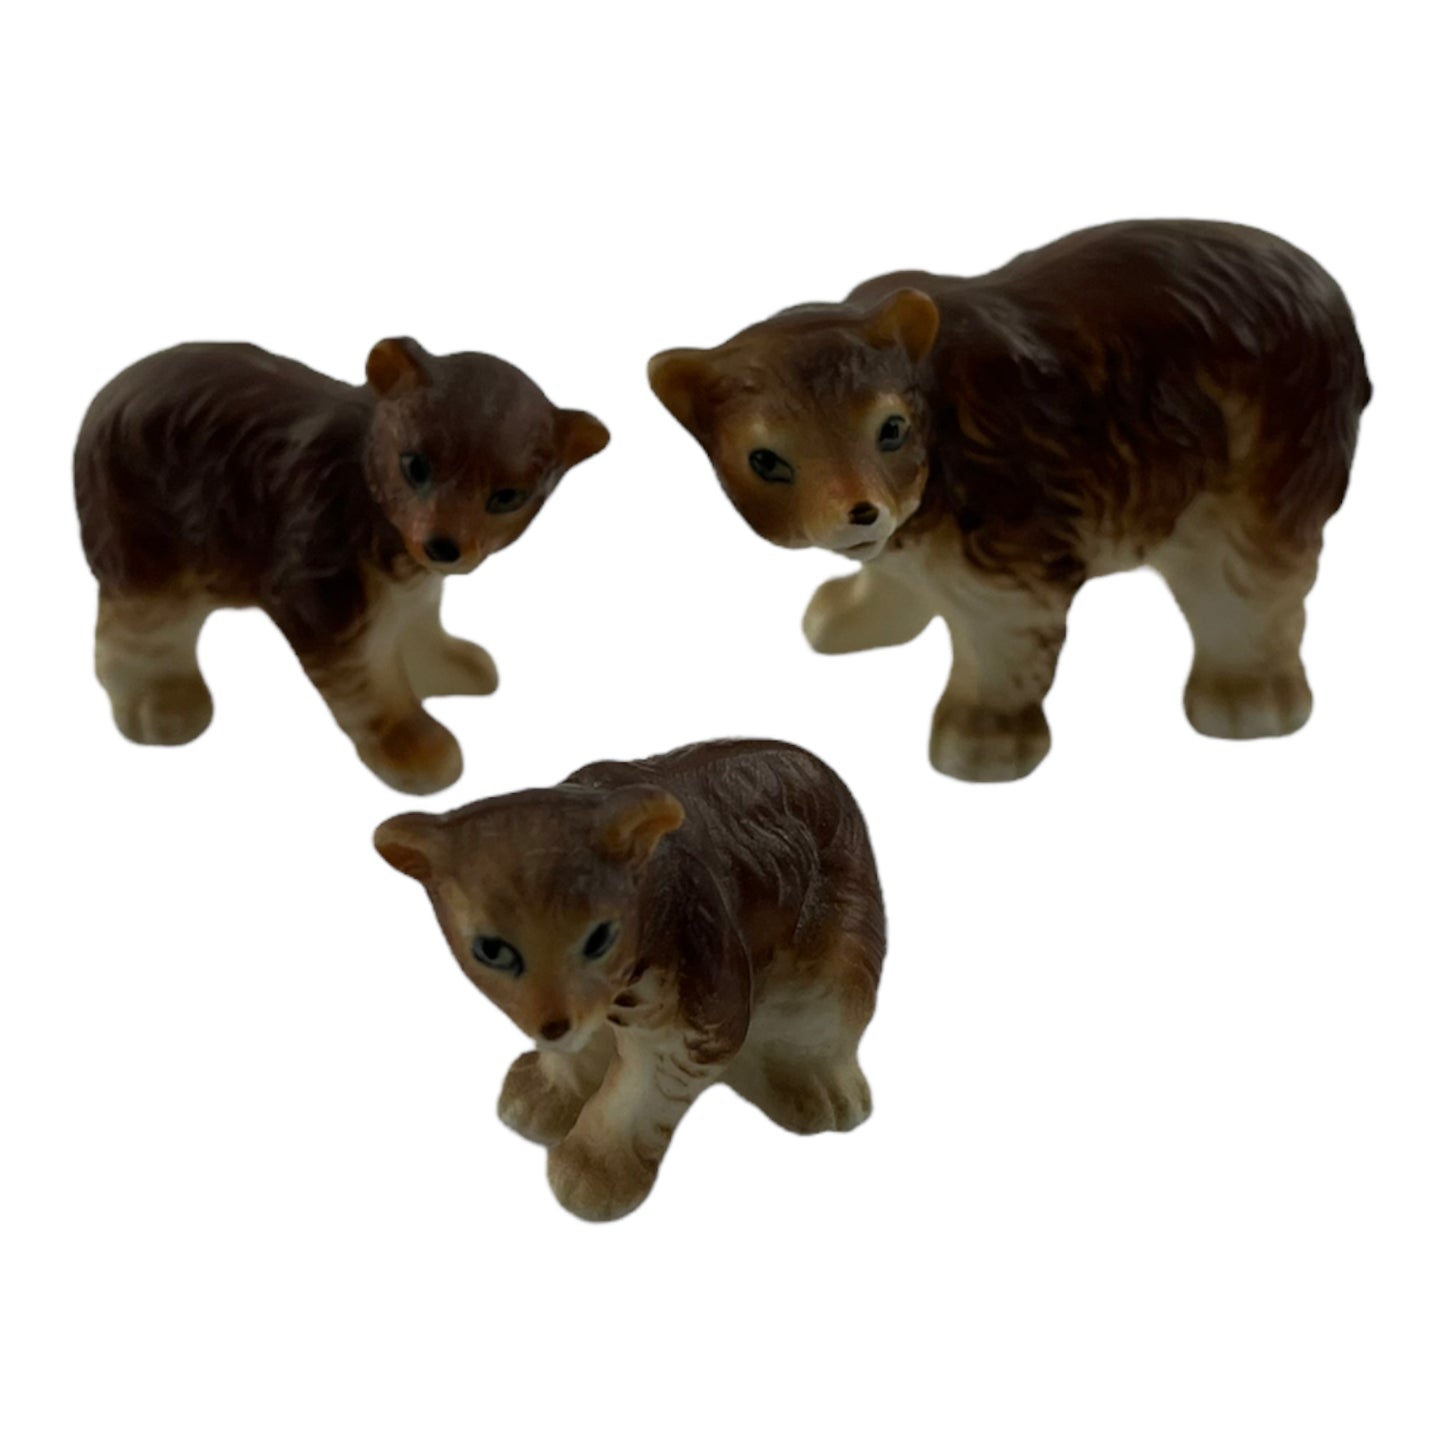 (3) Vintage Bear Ceramic Figure Father Mother Baby Lot